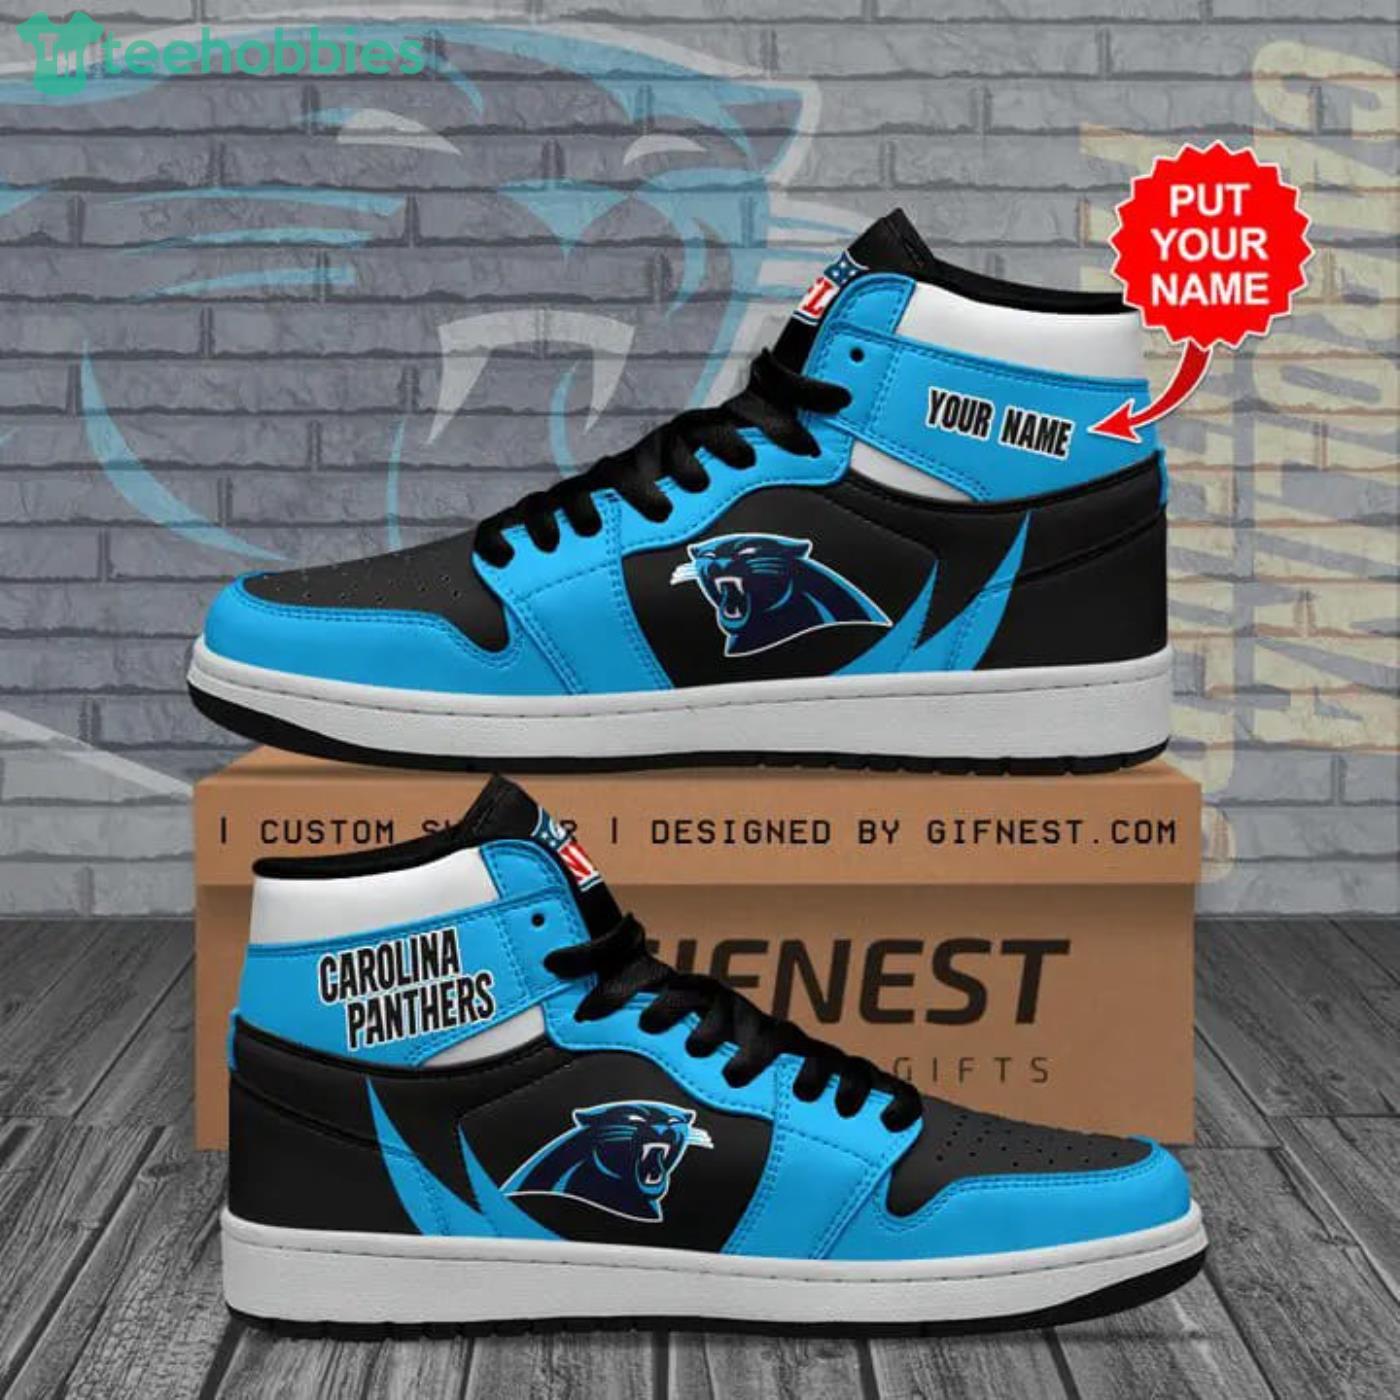 panthers fan gifts